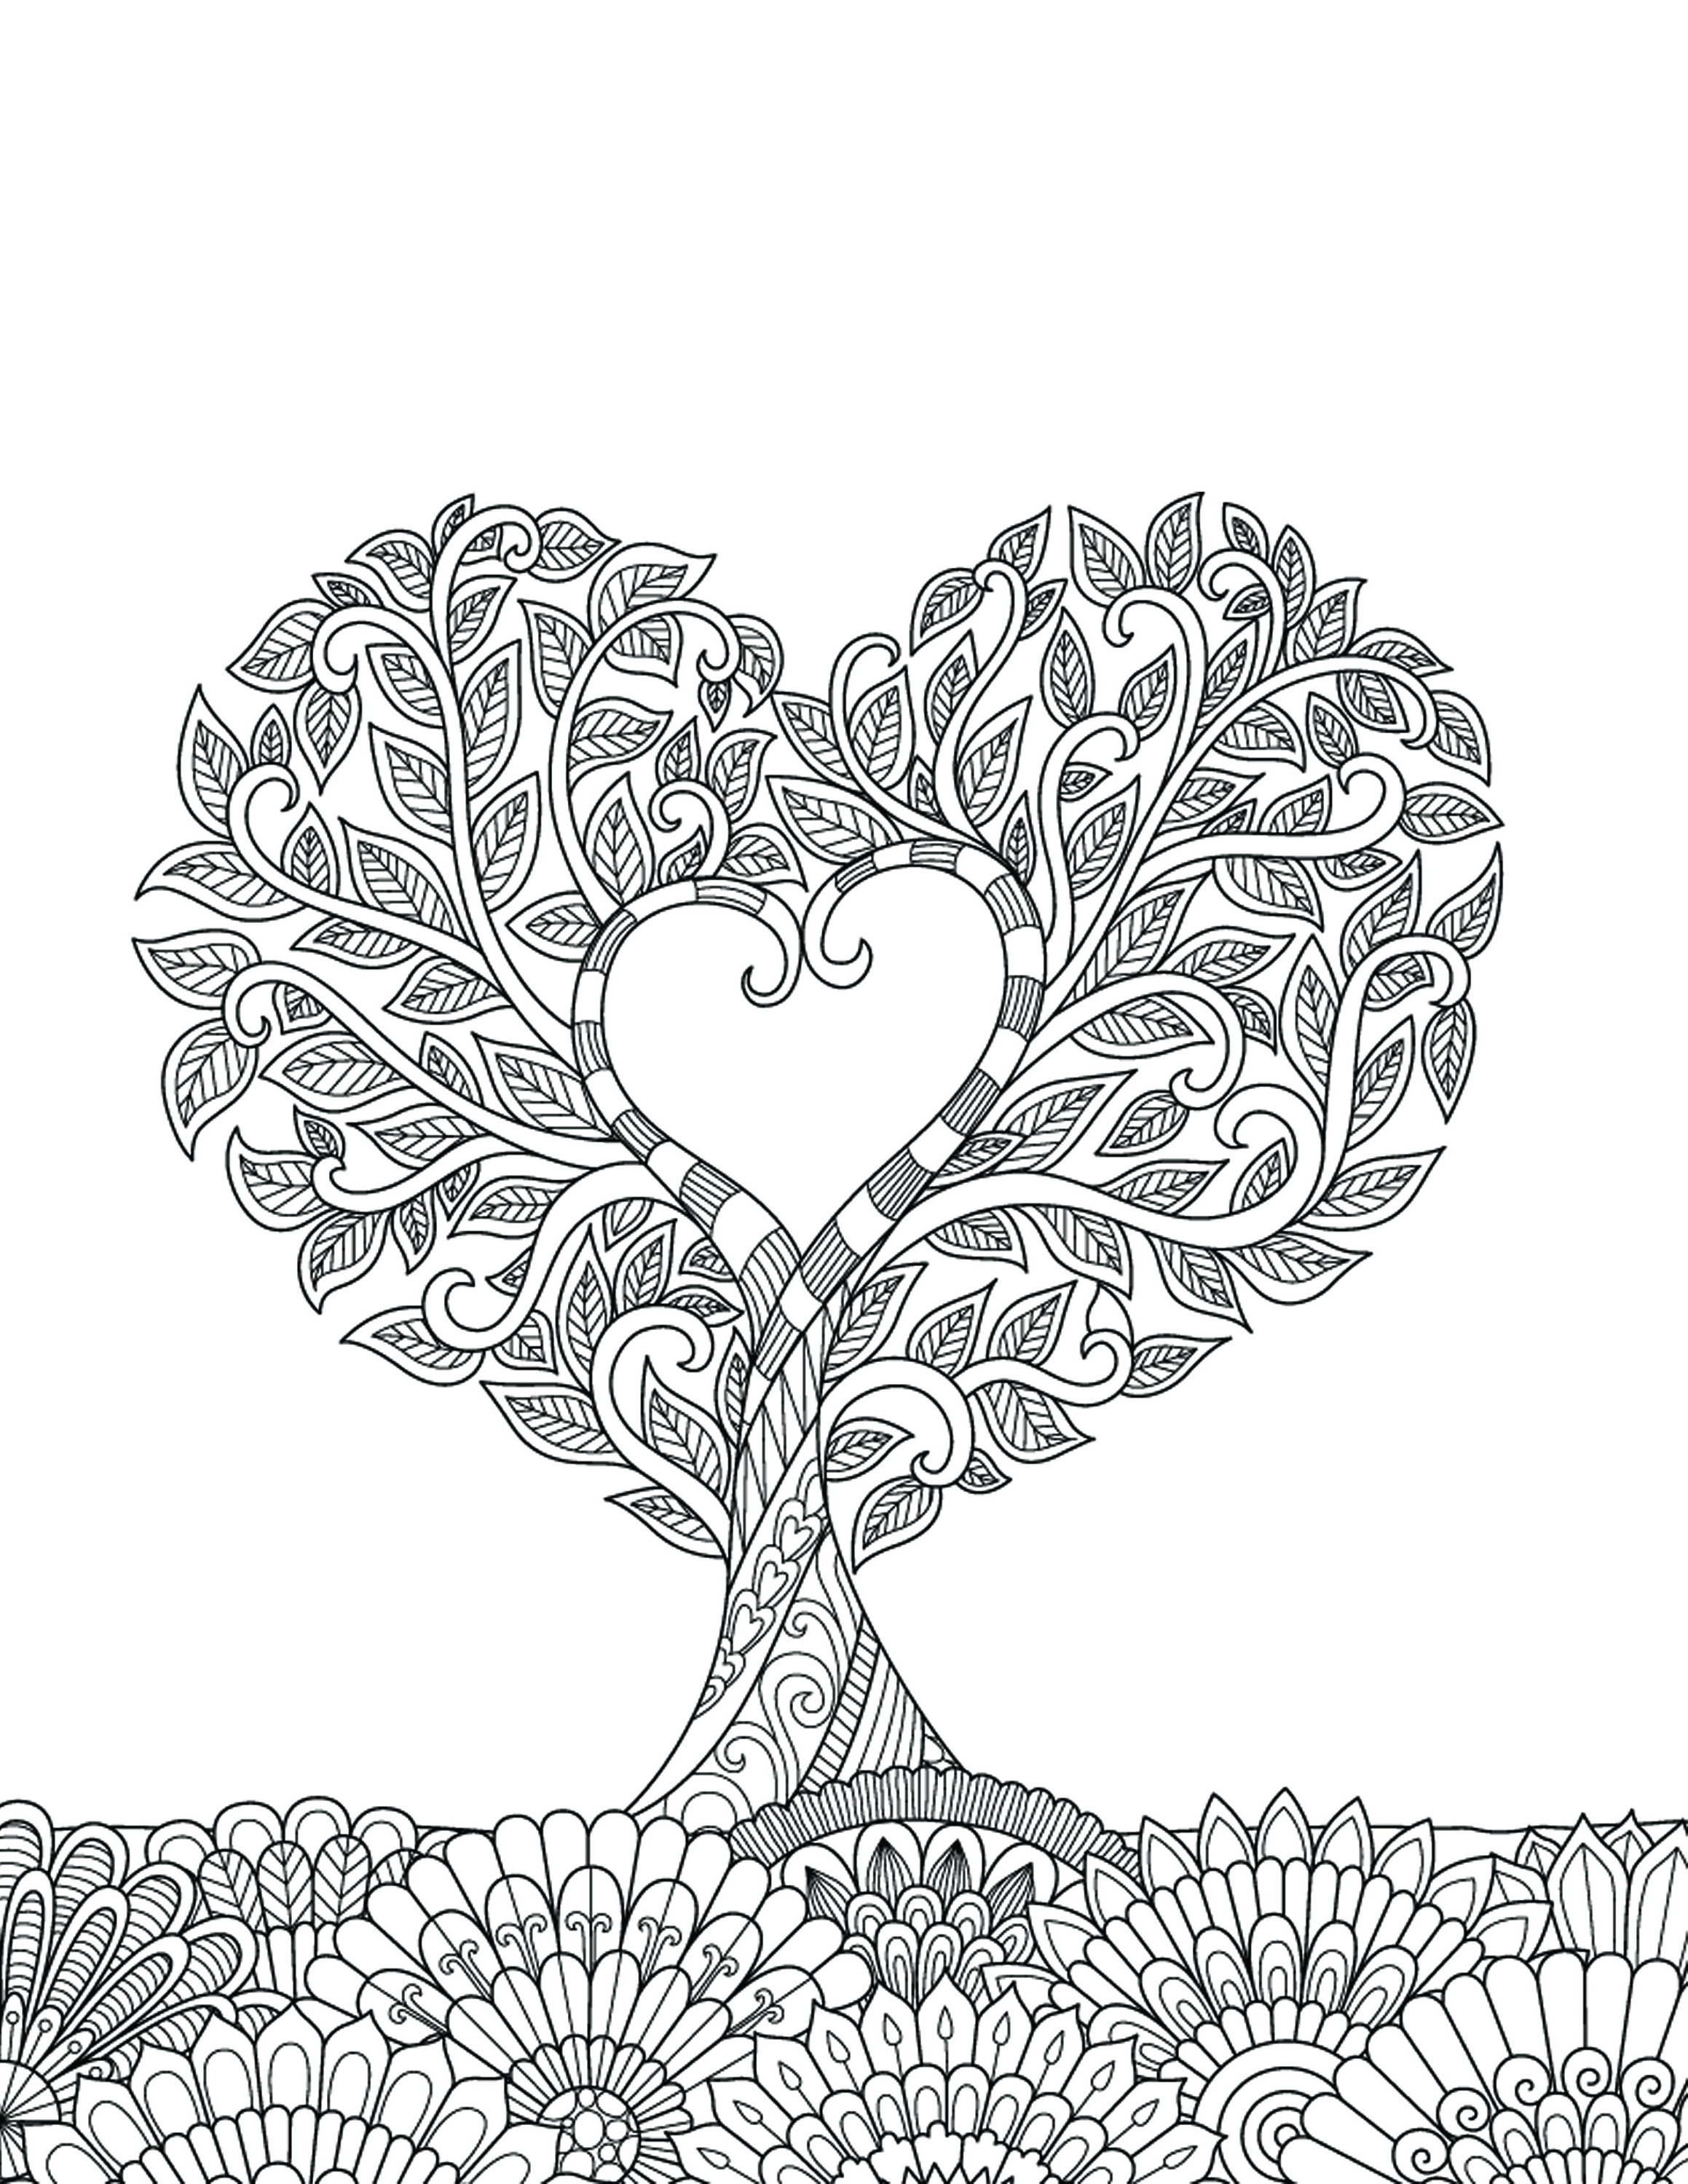 Heart Coloring Pages Pdf Heart Coloring Pages For Adults 1 Printable Coloring Page Instant Download Pdf